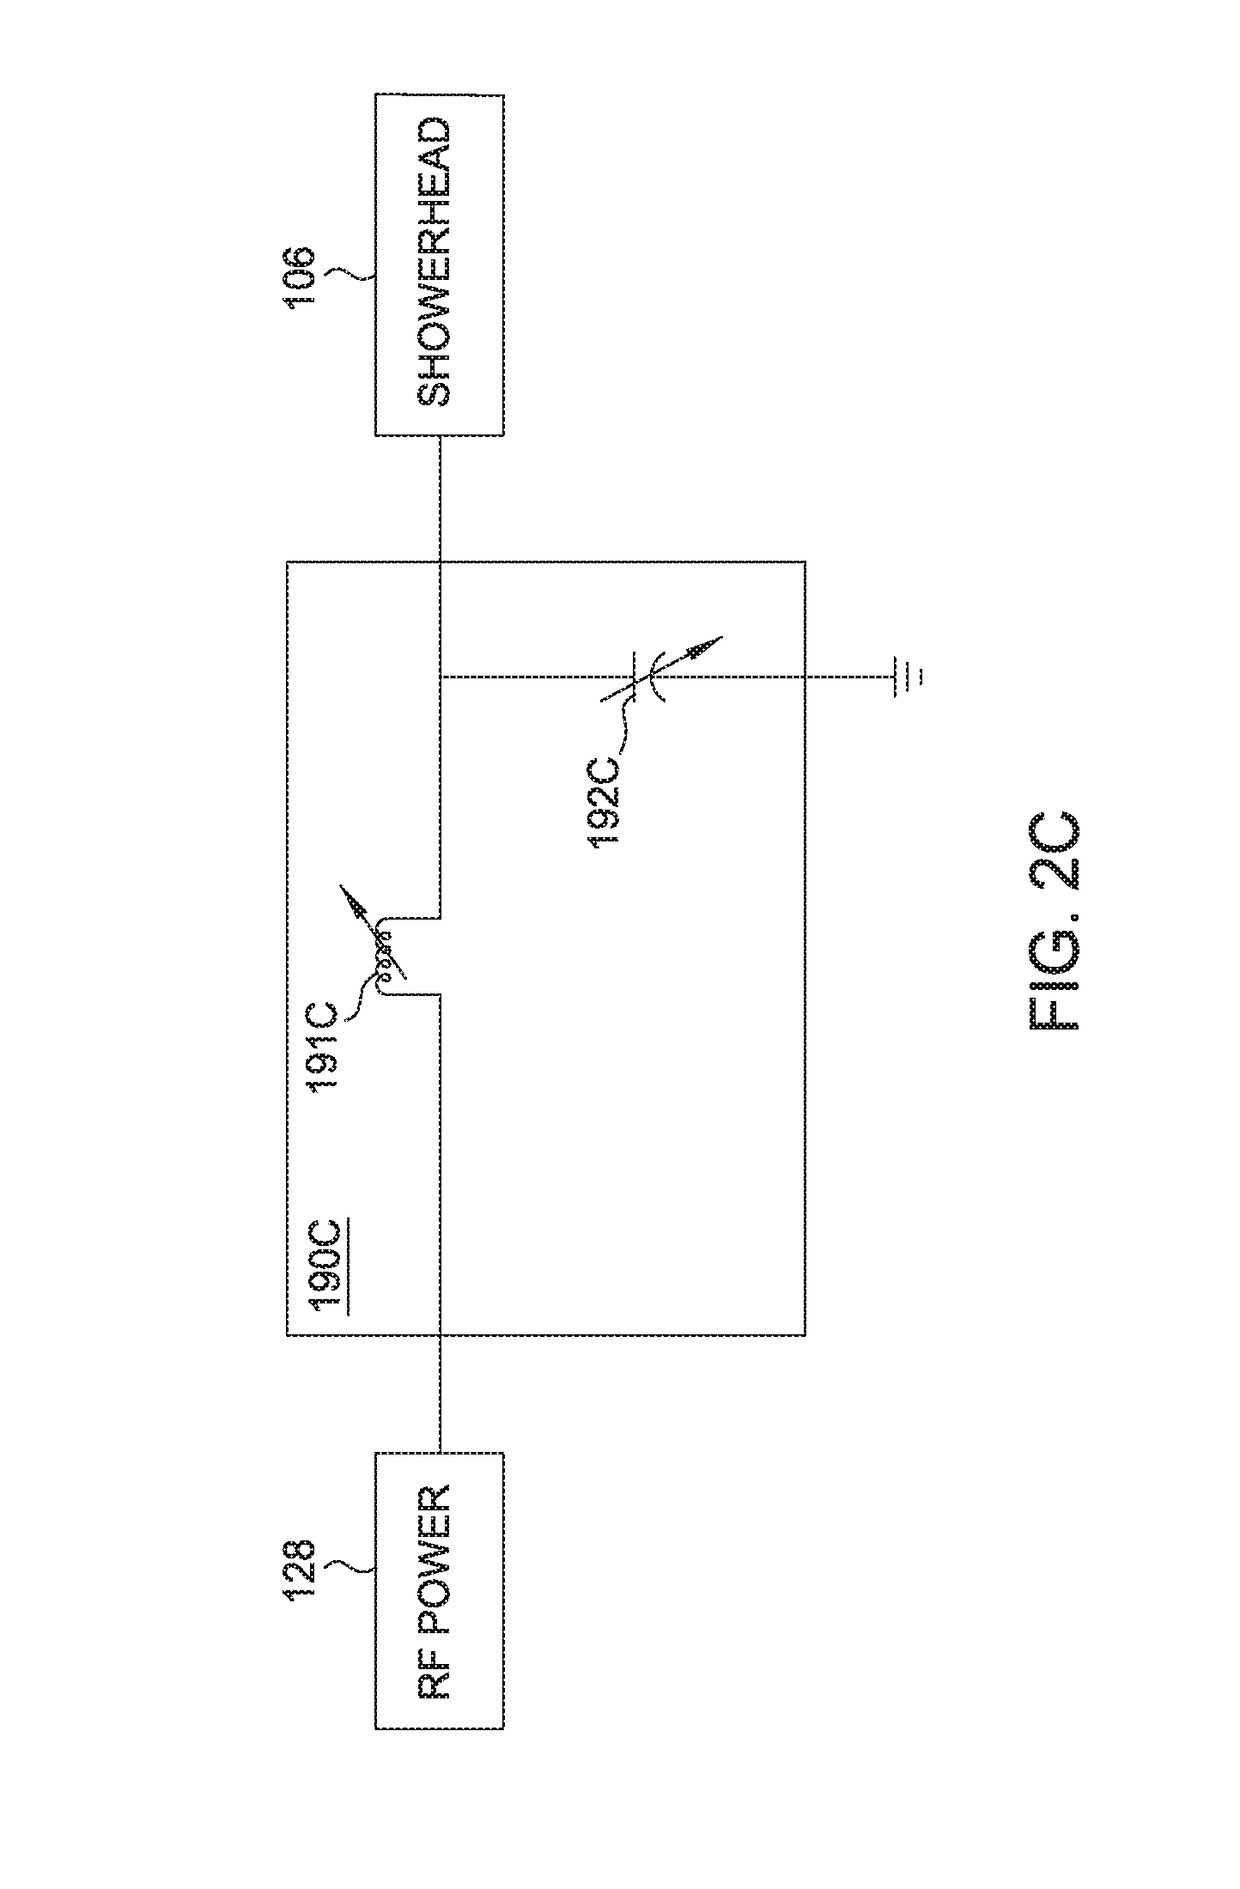 Substrate processing method and apparatus